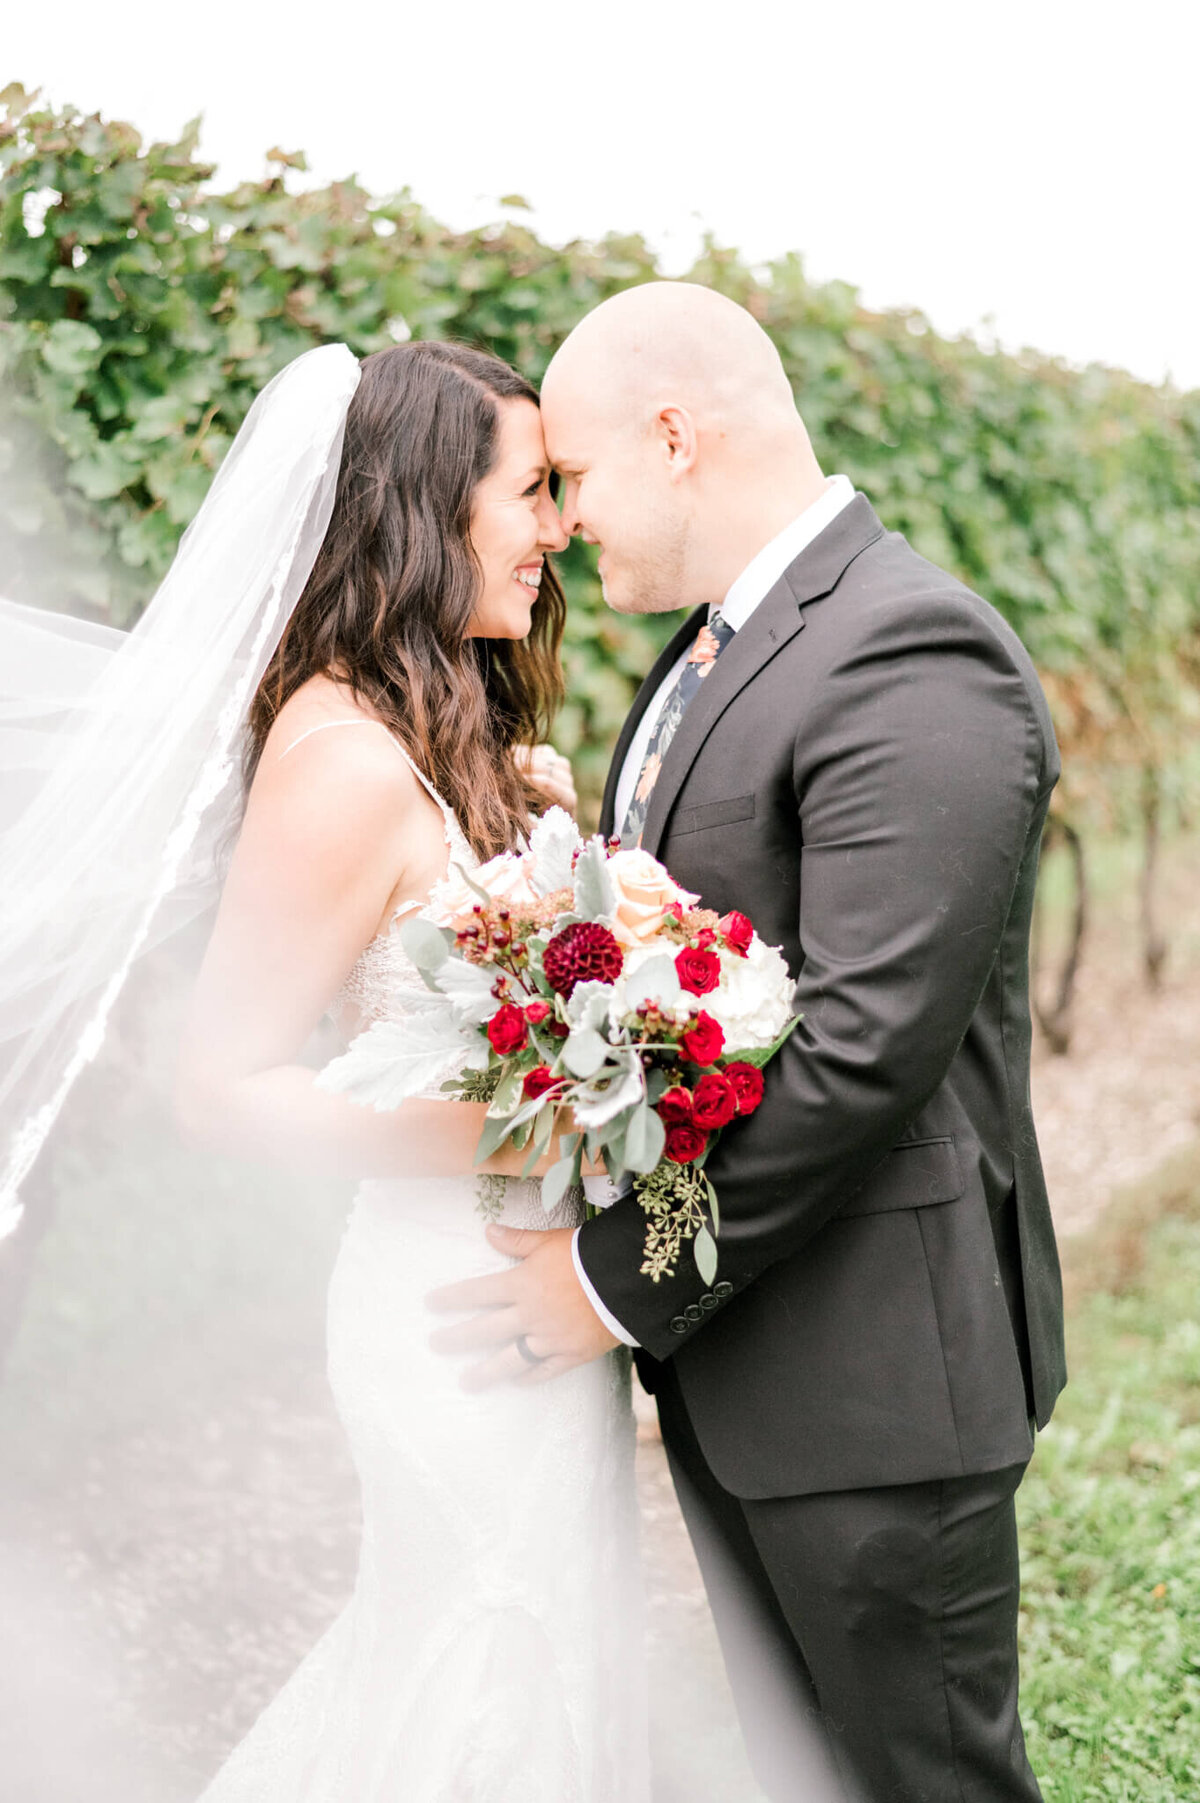 Bride and groom pose in vineyard with their foreheads touchings and looking into each others eyes